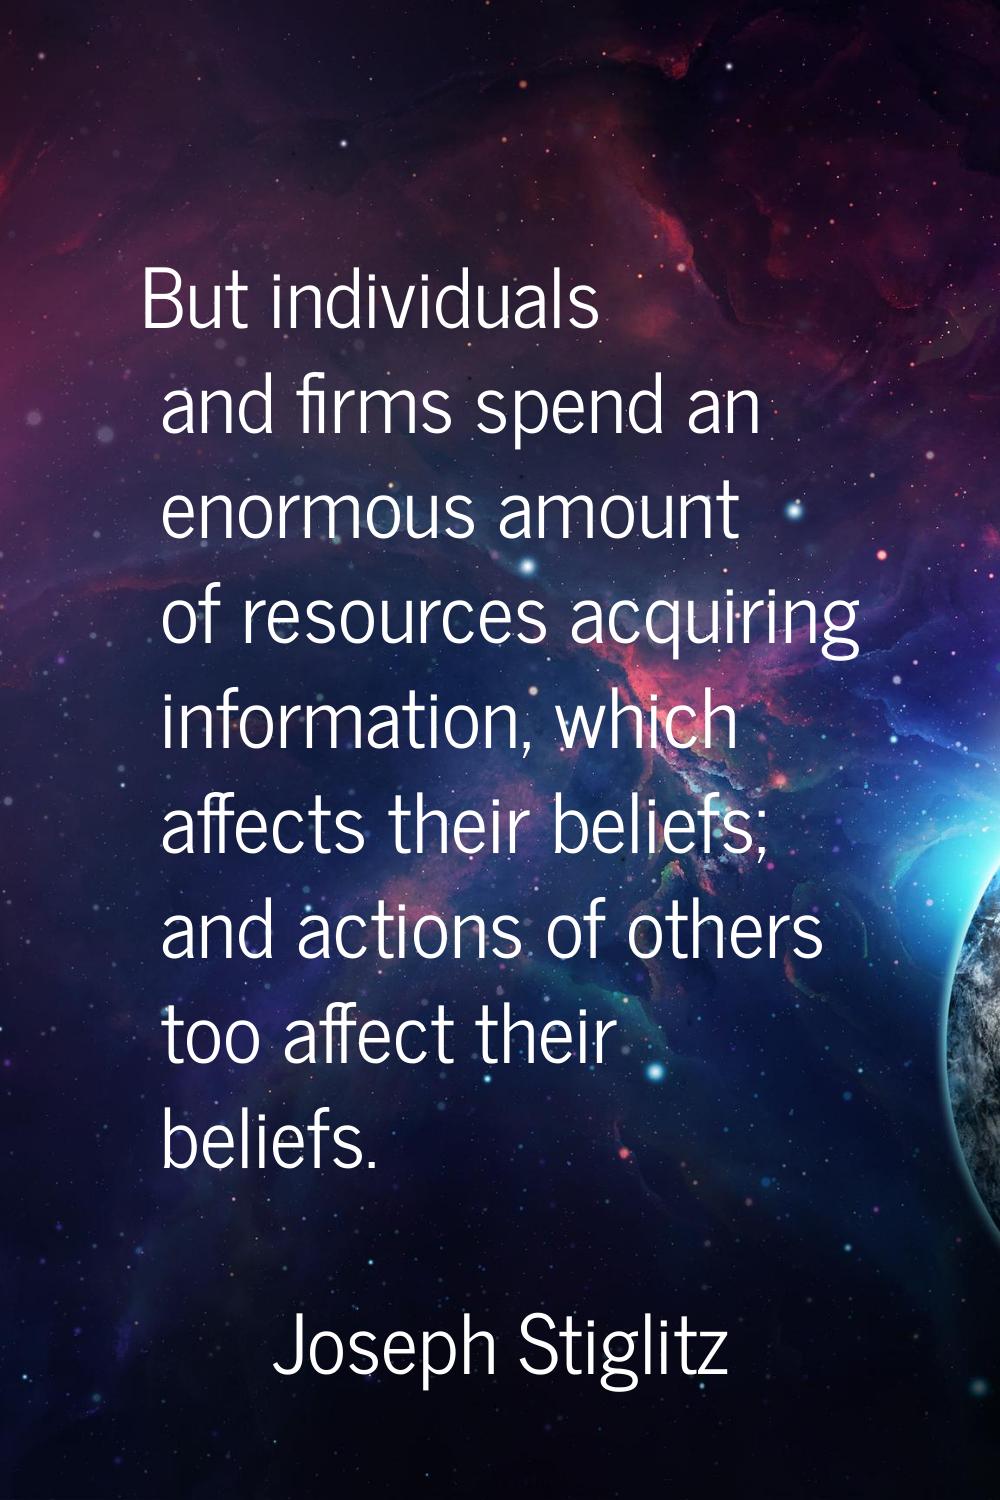 But individuals and firms spend an enormous amount of resources acquiring information, which affect